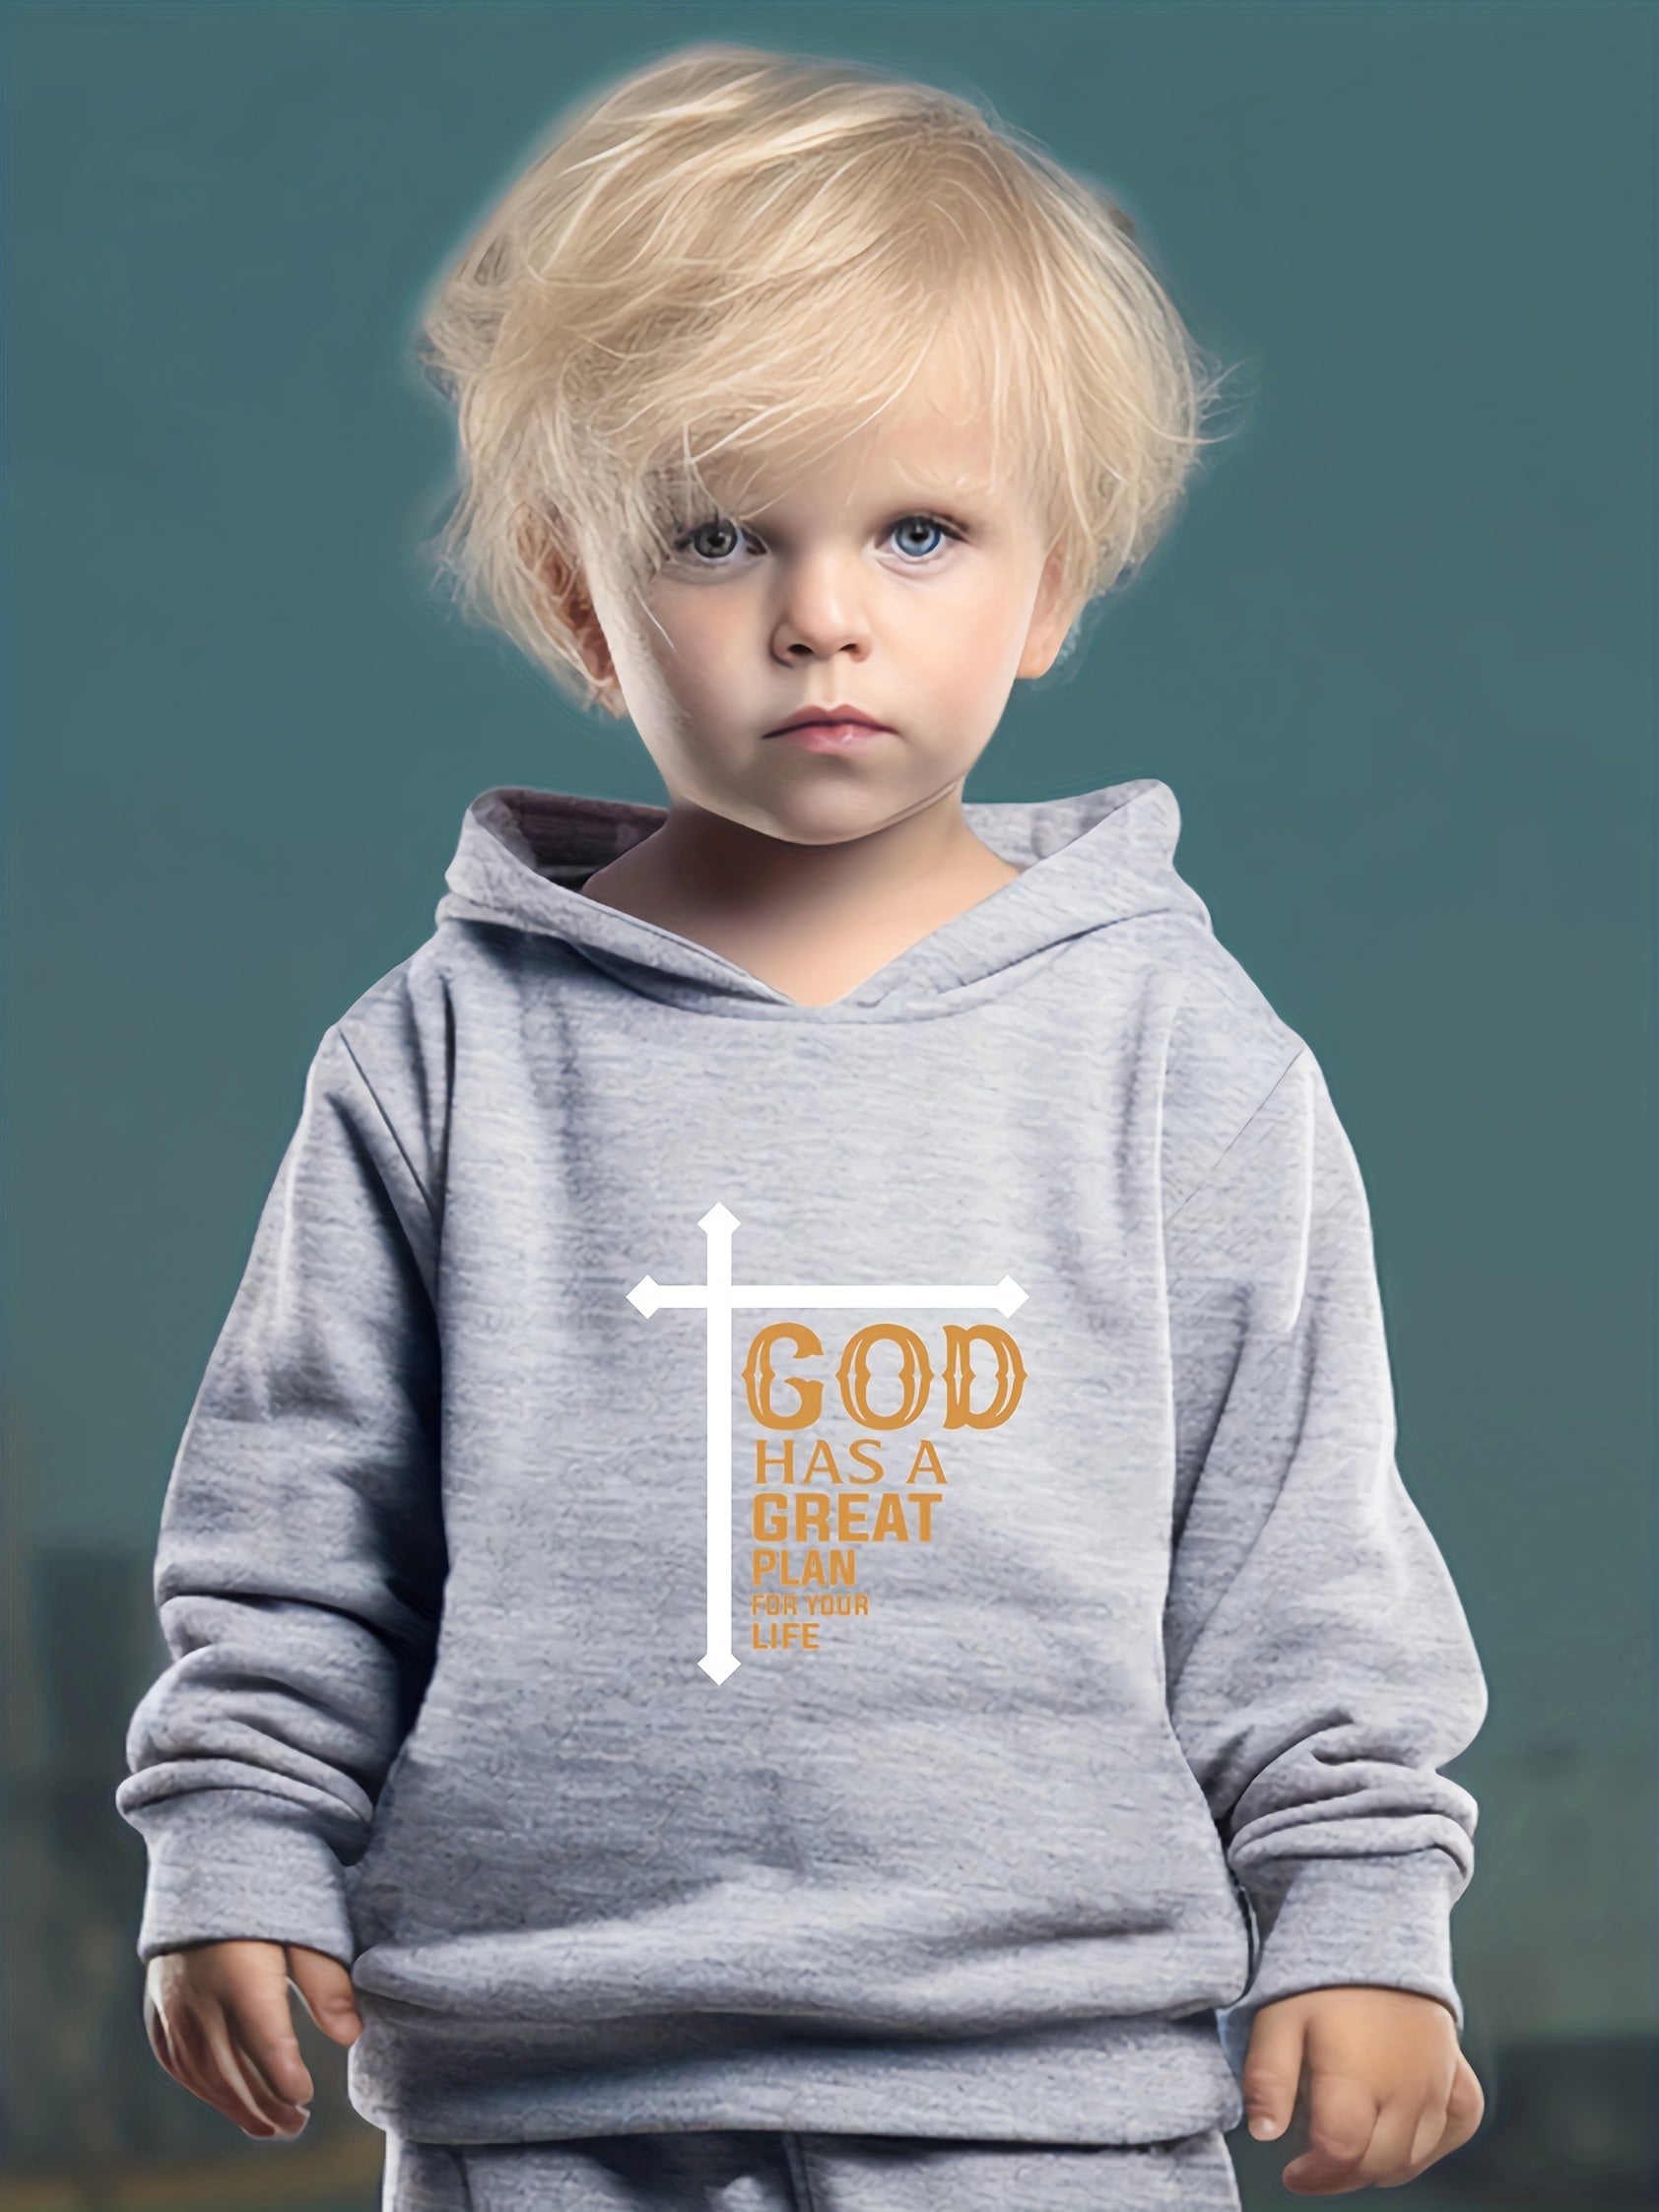 GOD HAS A GREAT PLAN FOR YOUR LIFE Toddler Christian Casual Outfit claimedbygoddesigns